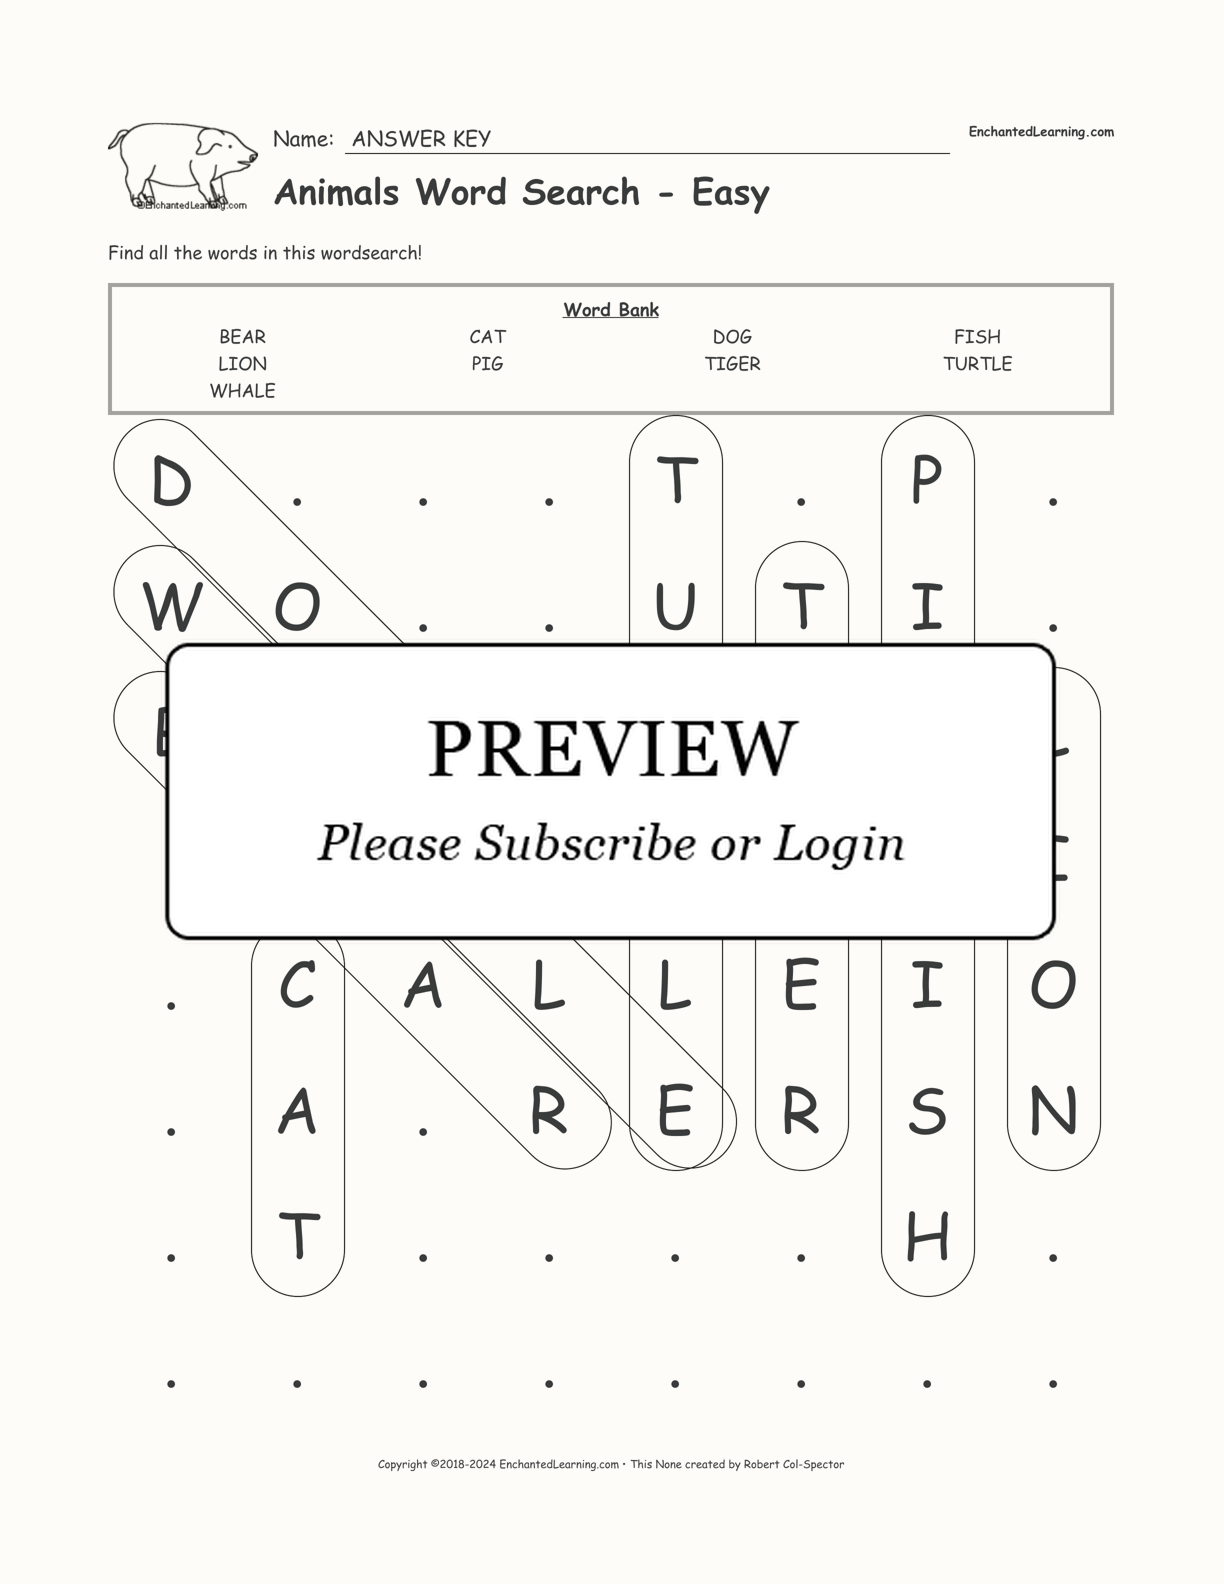 Animals Word Search - Easy interactive worksheet page 2